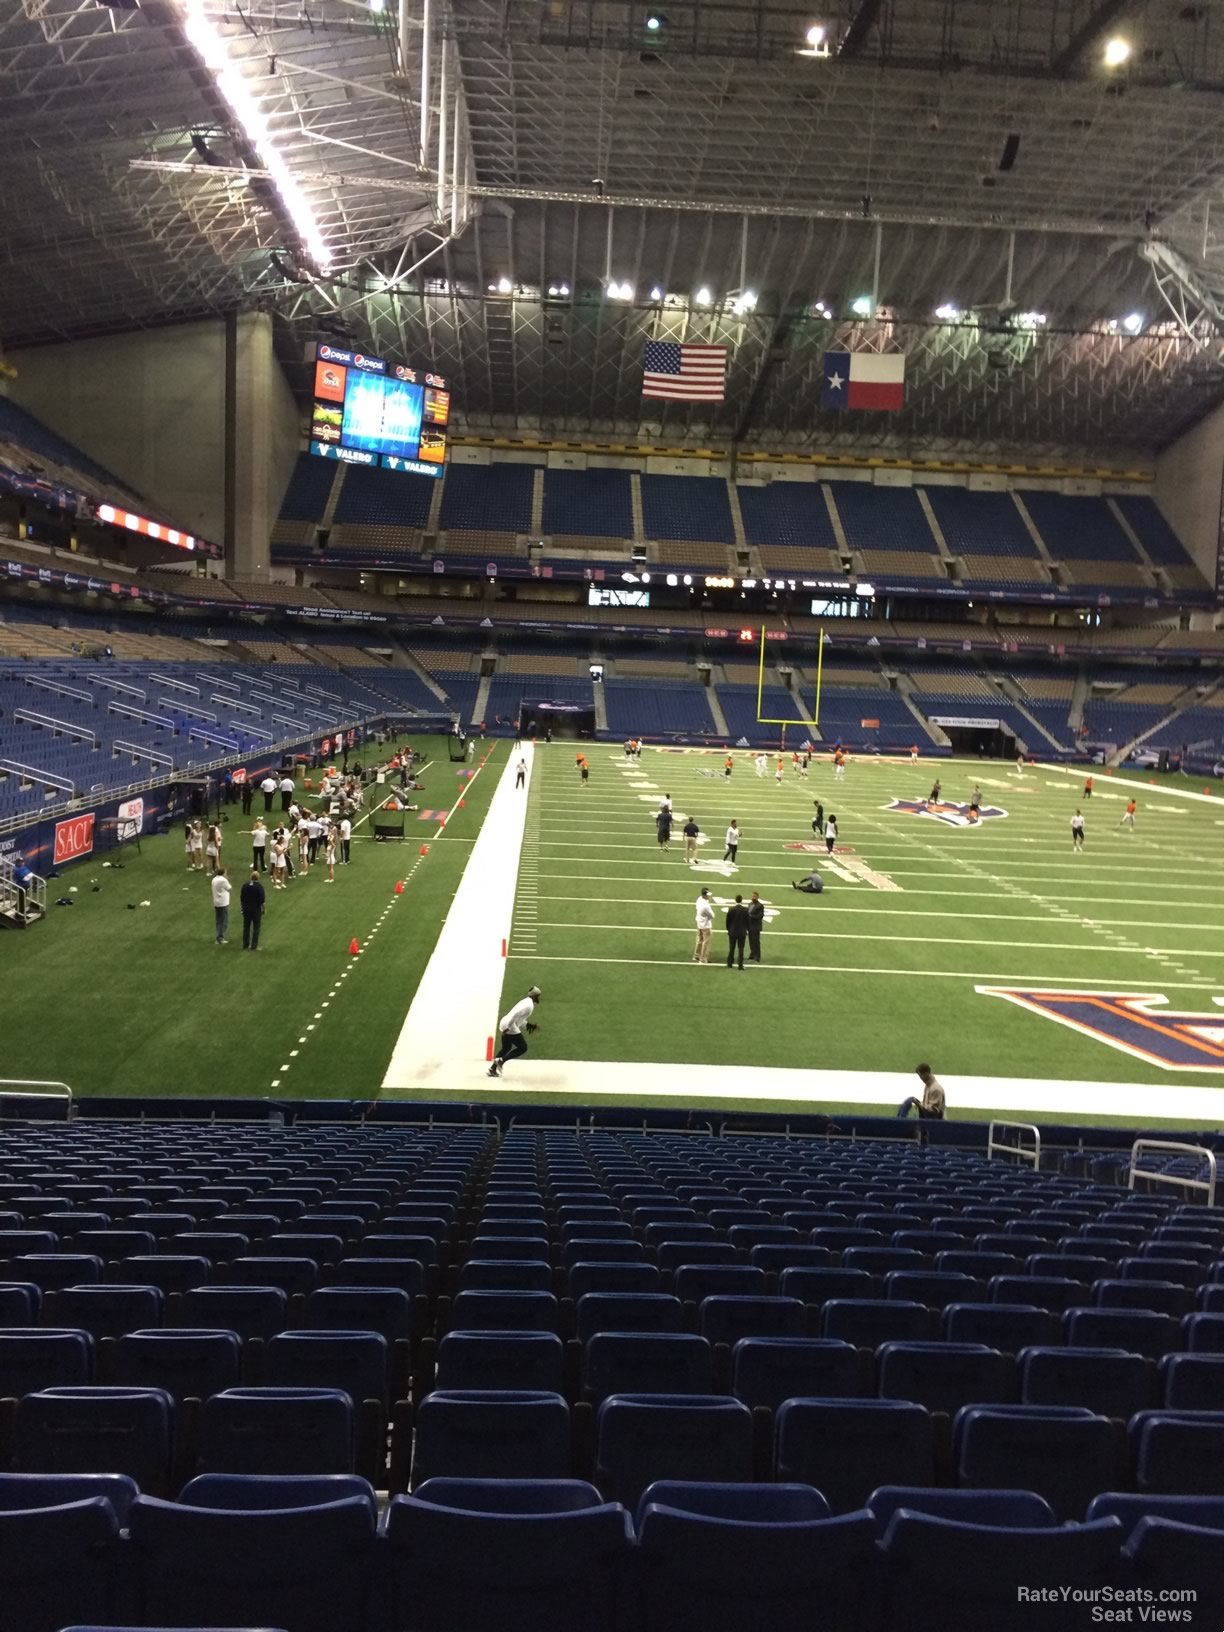 section 103, row 18 seat view  for football - alamodome